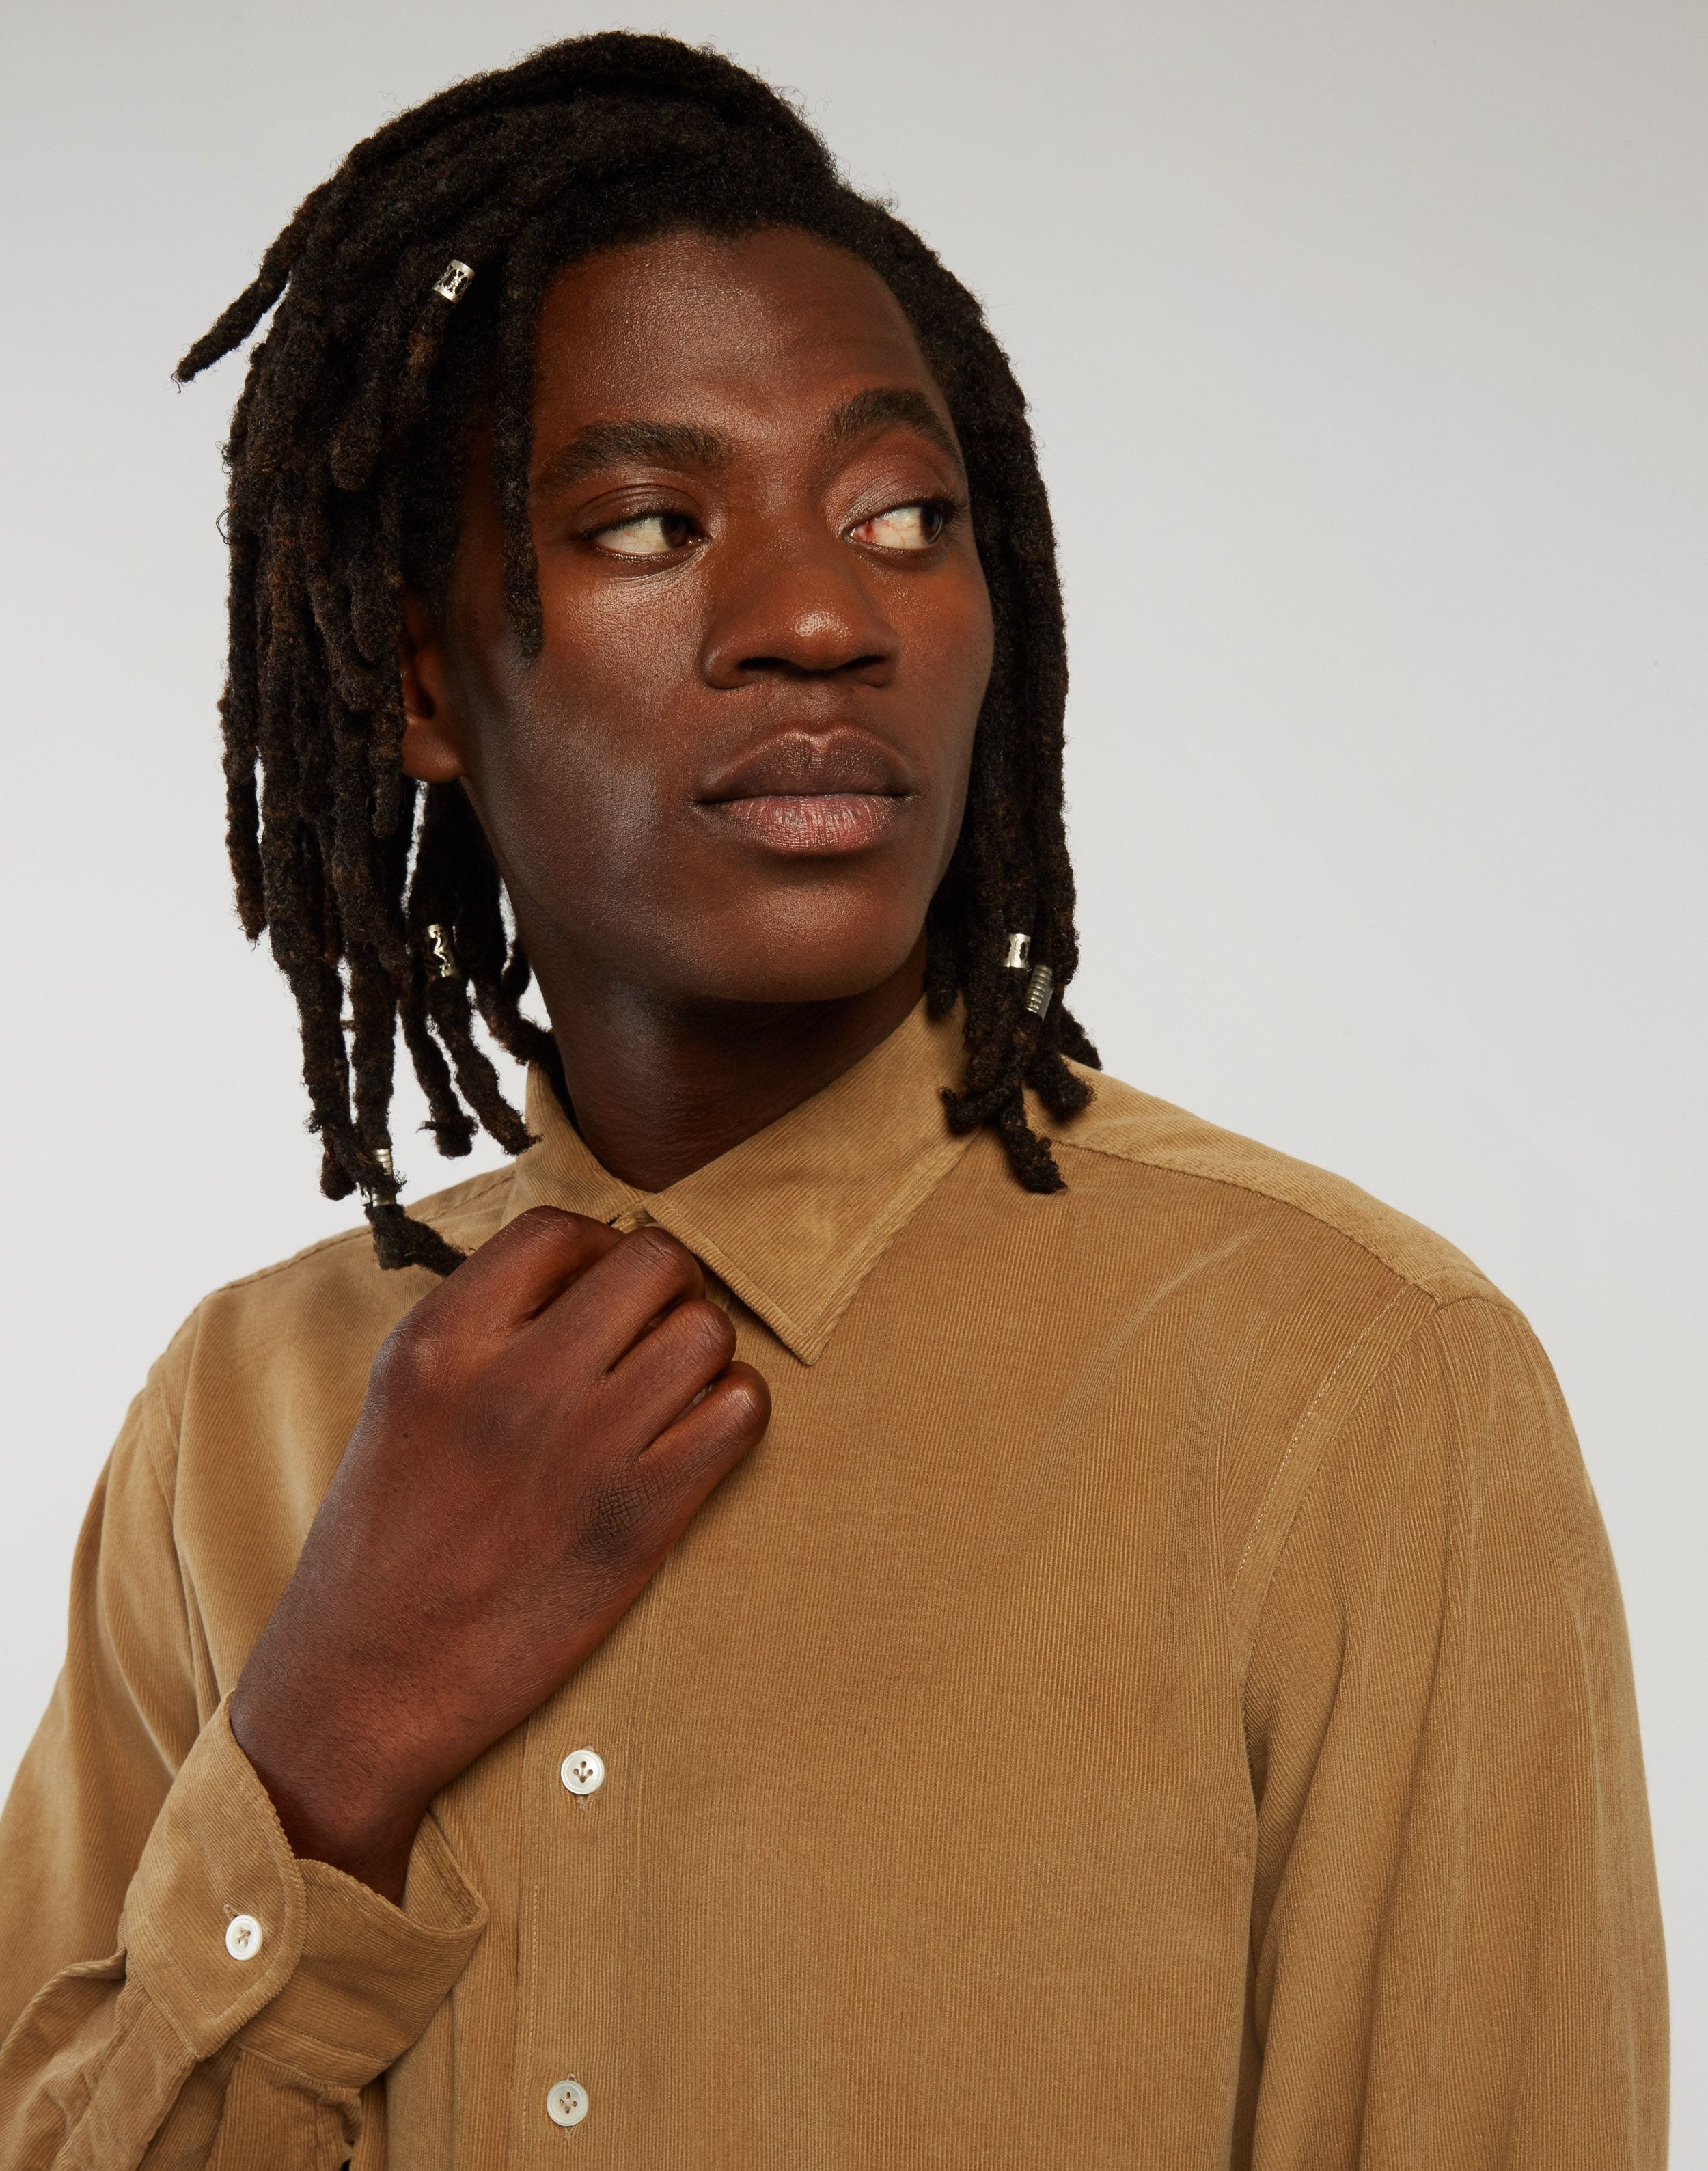 Washed shirt in beige cotton needlecord